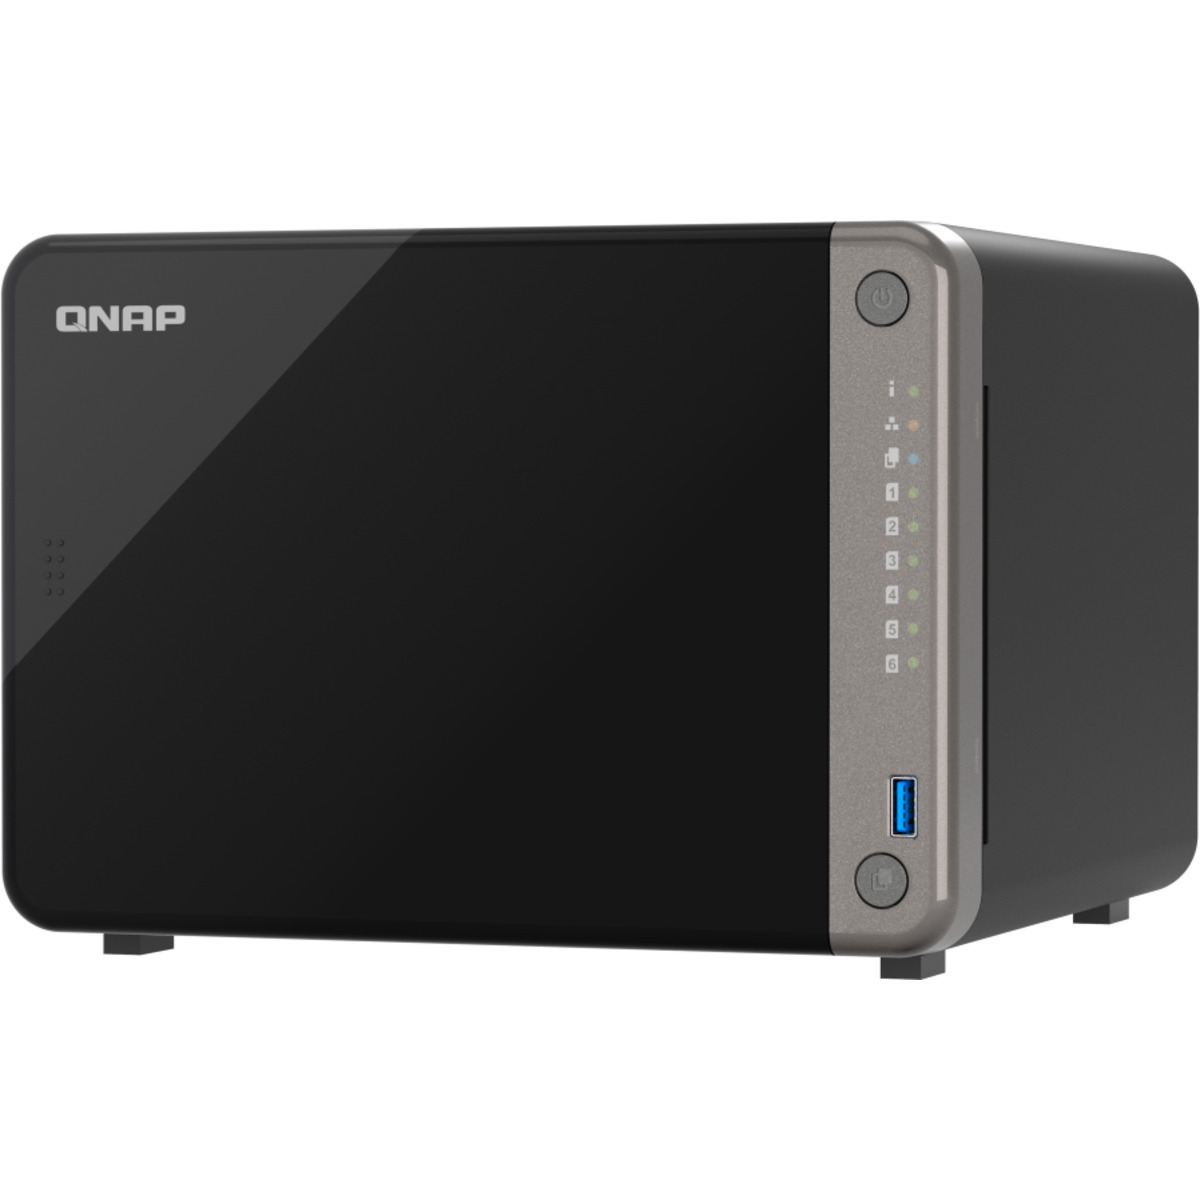 QNAP TS-AI642 8tb 6-Bay Desktop Multimedia / Power User / Business NAS - Network Attached Storage Device 4x2tb Seagate BarraCuda ST2000DM008 3.5 7200rpm SATA 6Gb/s HDD CONSUMER Class Drives Installed - Burn-In Tested TS-AI642